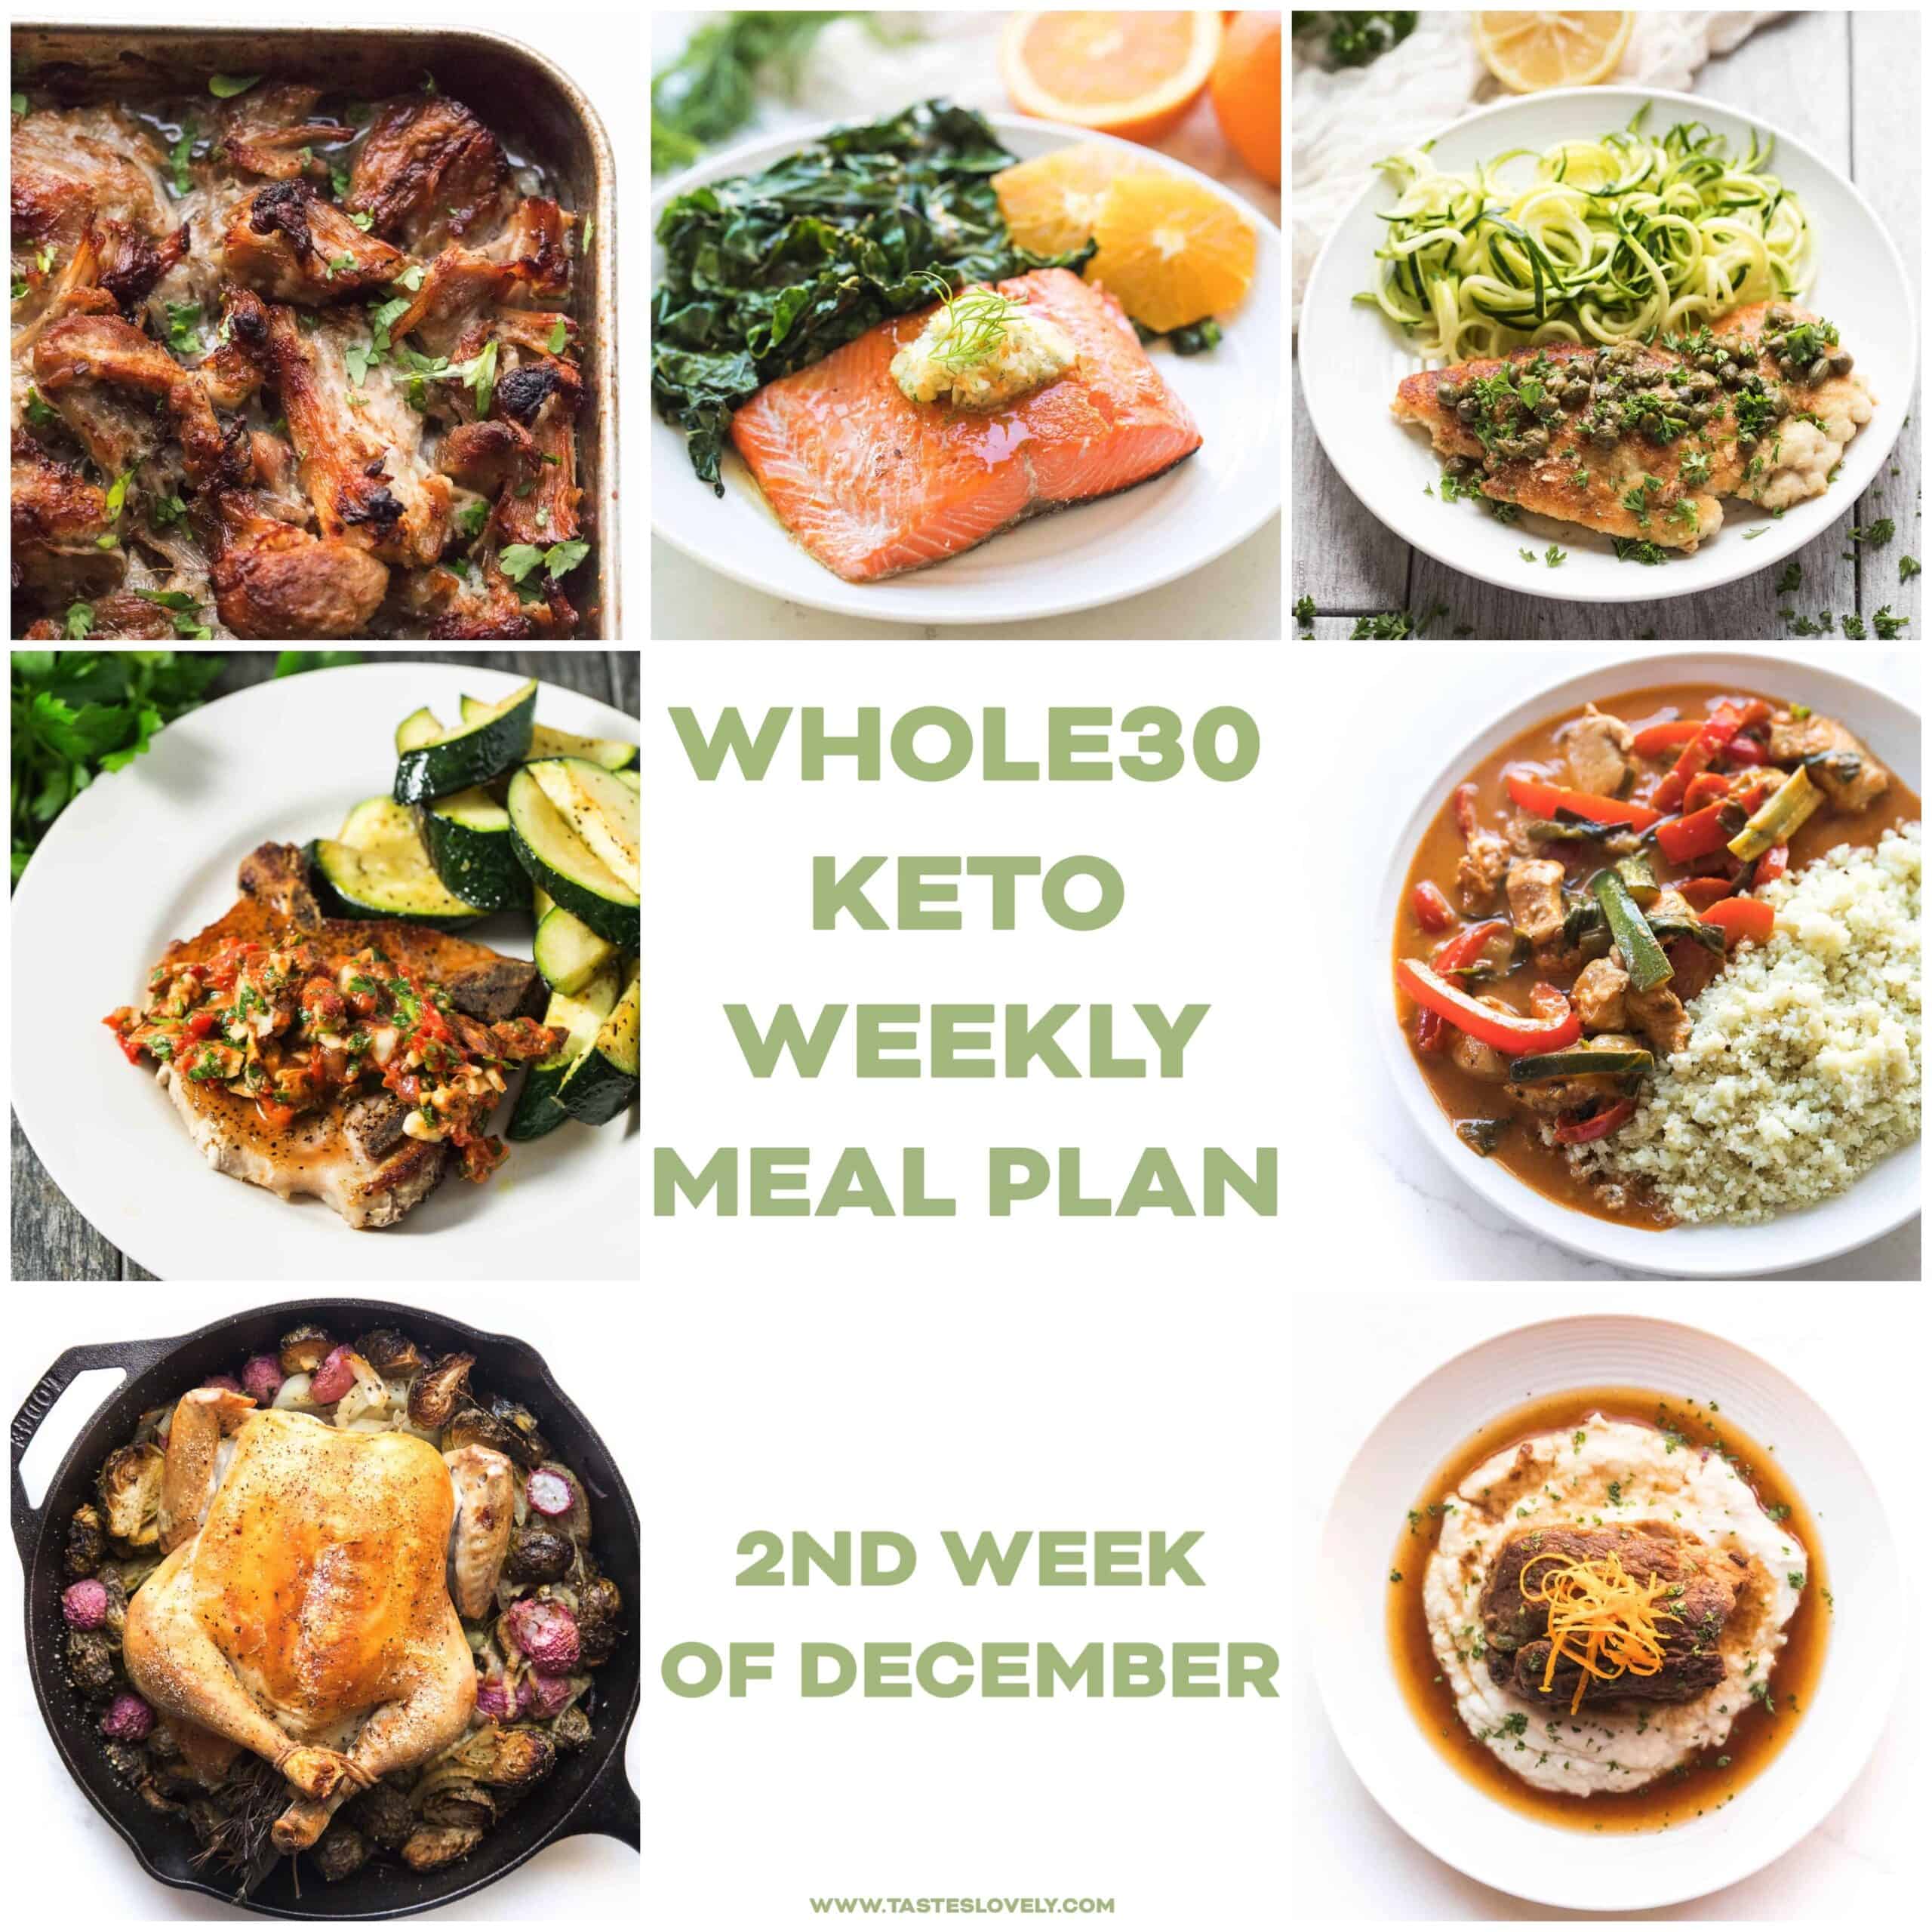 WHOLE30 KETO WEEKLY MEAL PLAN